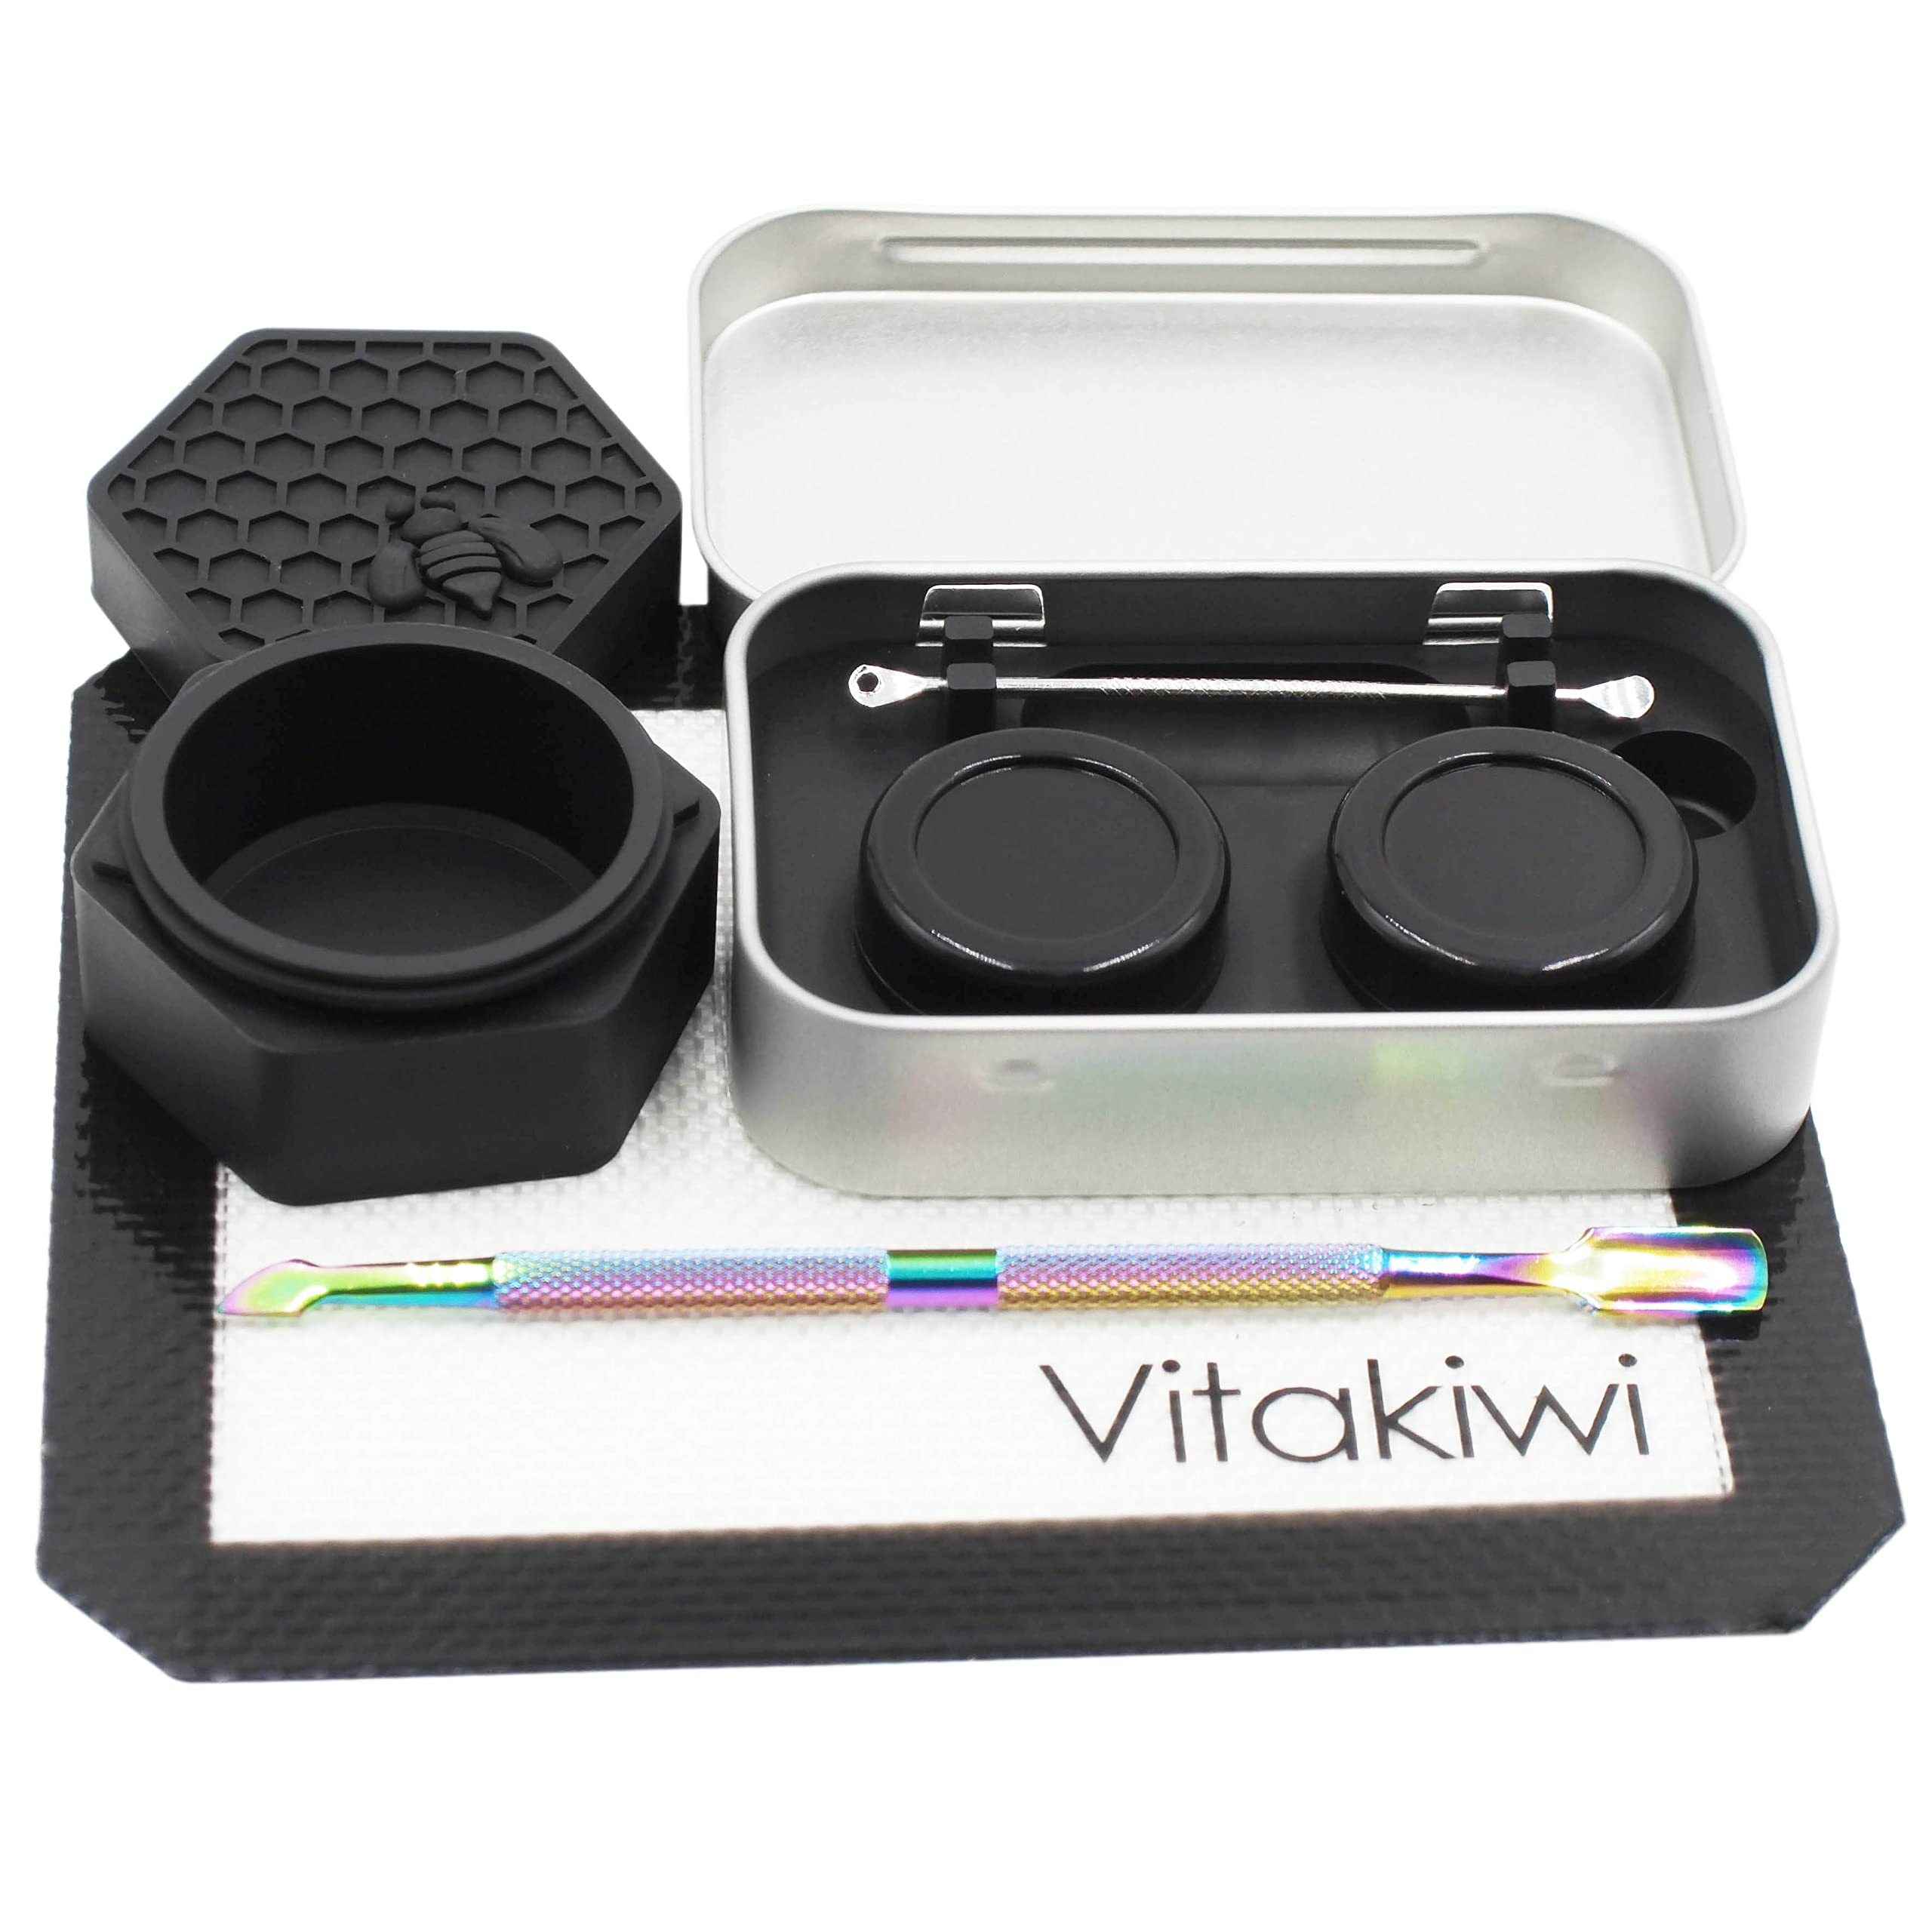 Vitakiwi Silicone Wax Carving Travel Kit with 5ml 26ml Honeybee Concentrate Containers + 5.2" Rainbow Tool + 5.9"×4.9" Mat + Tin Carrying Box (Black Color)